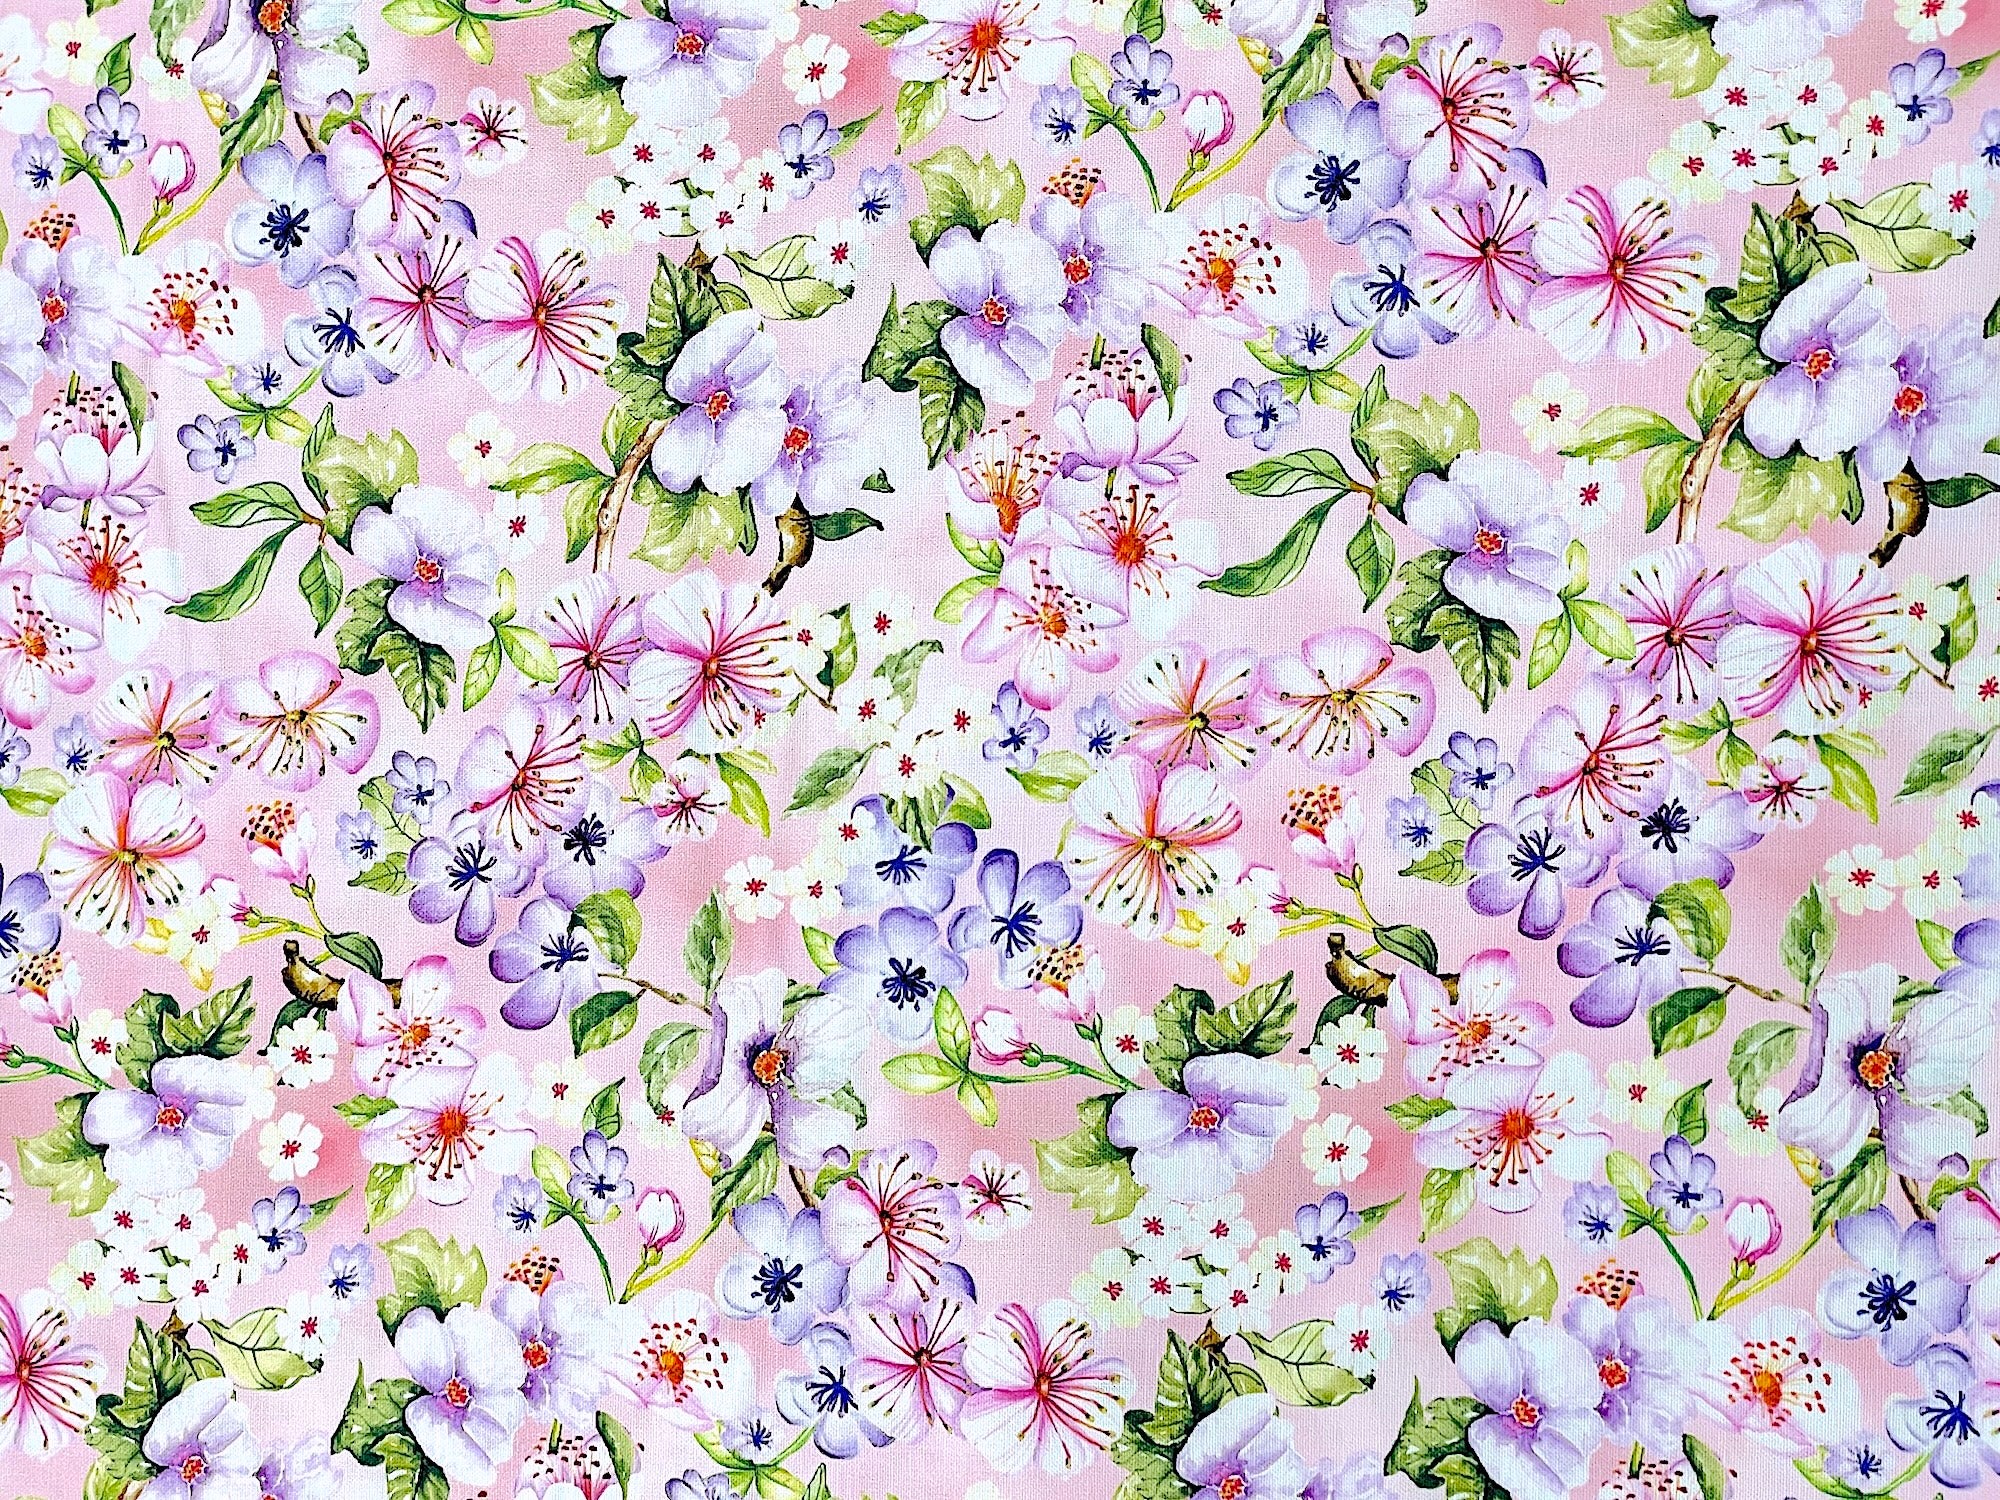 Light pink cotton fabric covered with pink and purple flowers.